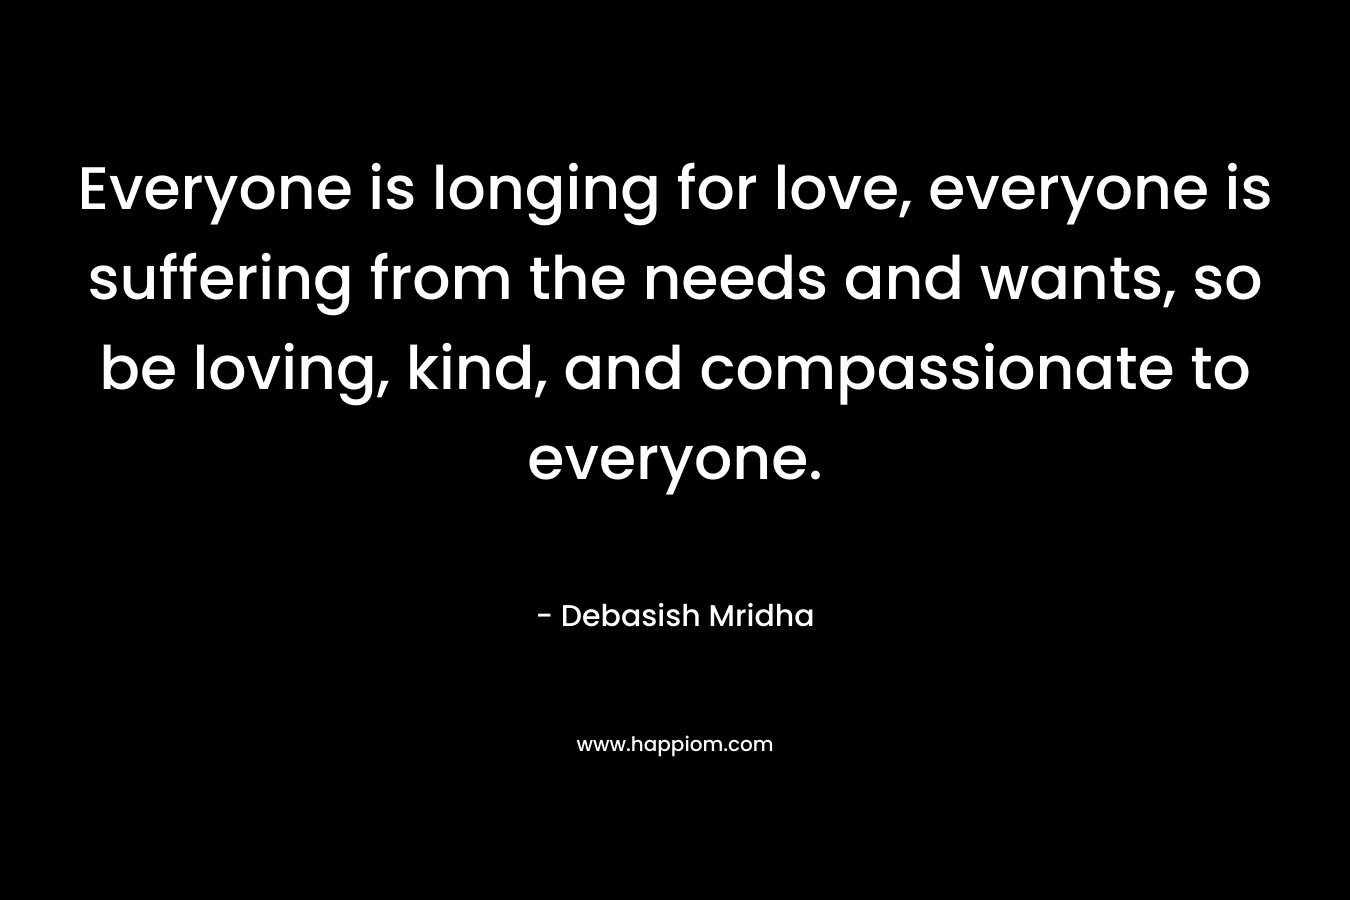 Everyone is longing for love, everyone is suffering from the needs and wants, so be loving, kind, and compassionate to everyone.